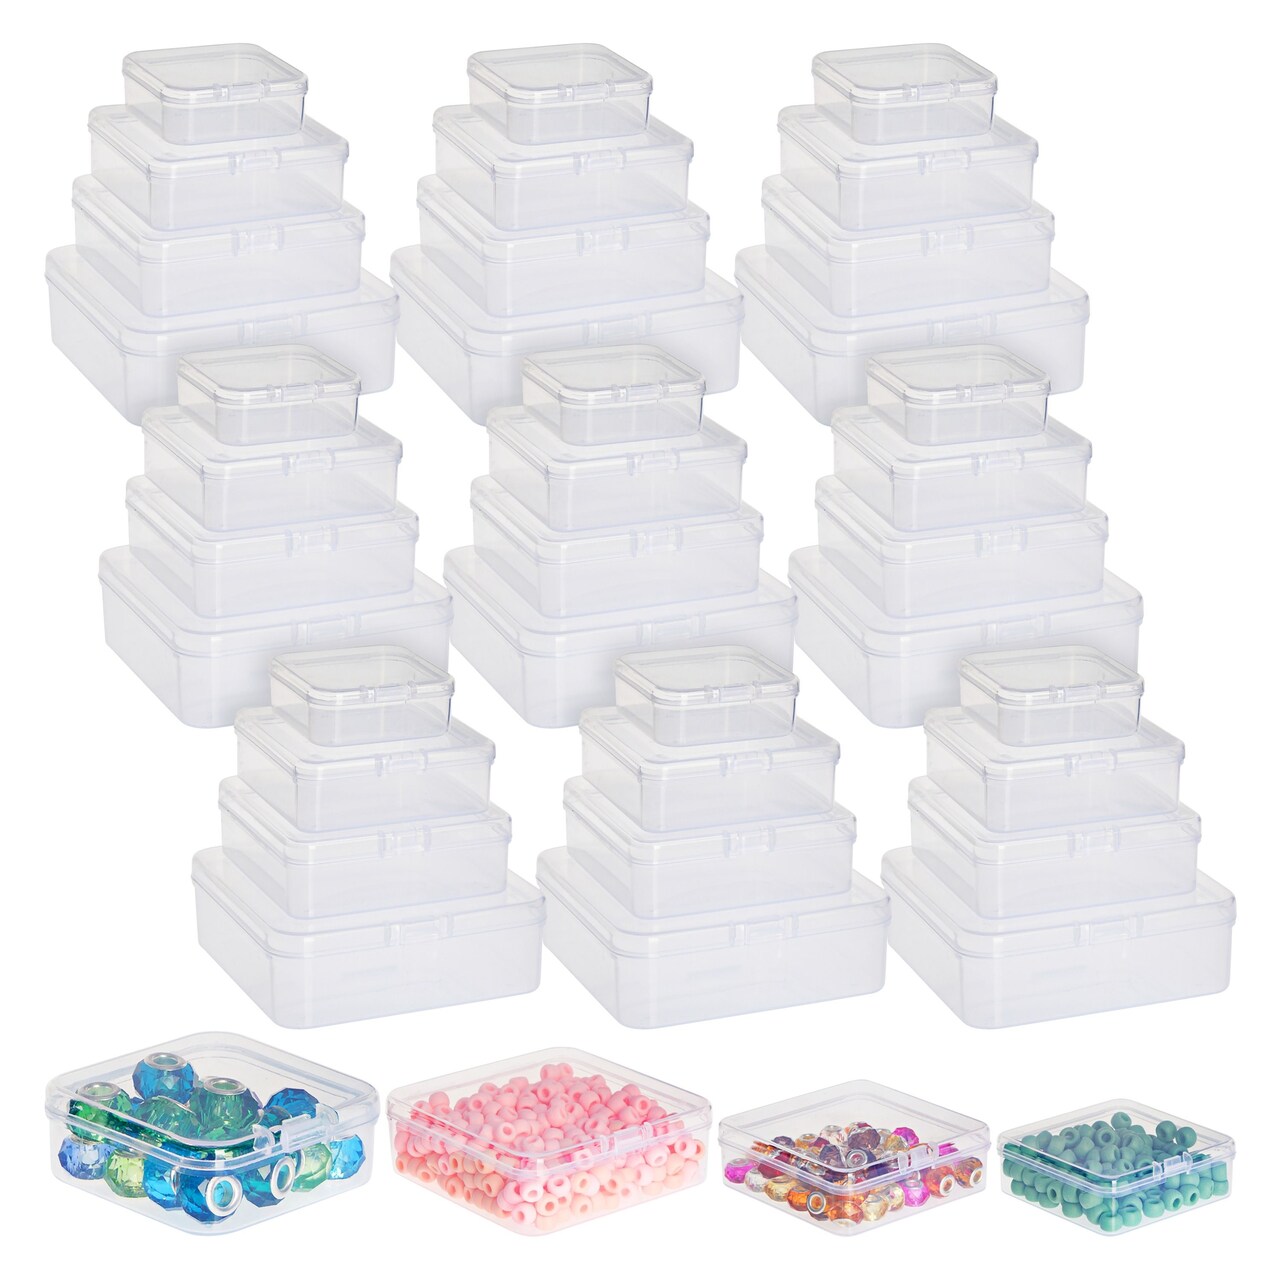 40 Piece Empty Square Mini Storage Containers with Lids for Crafts